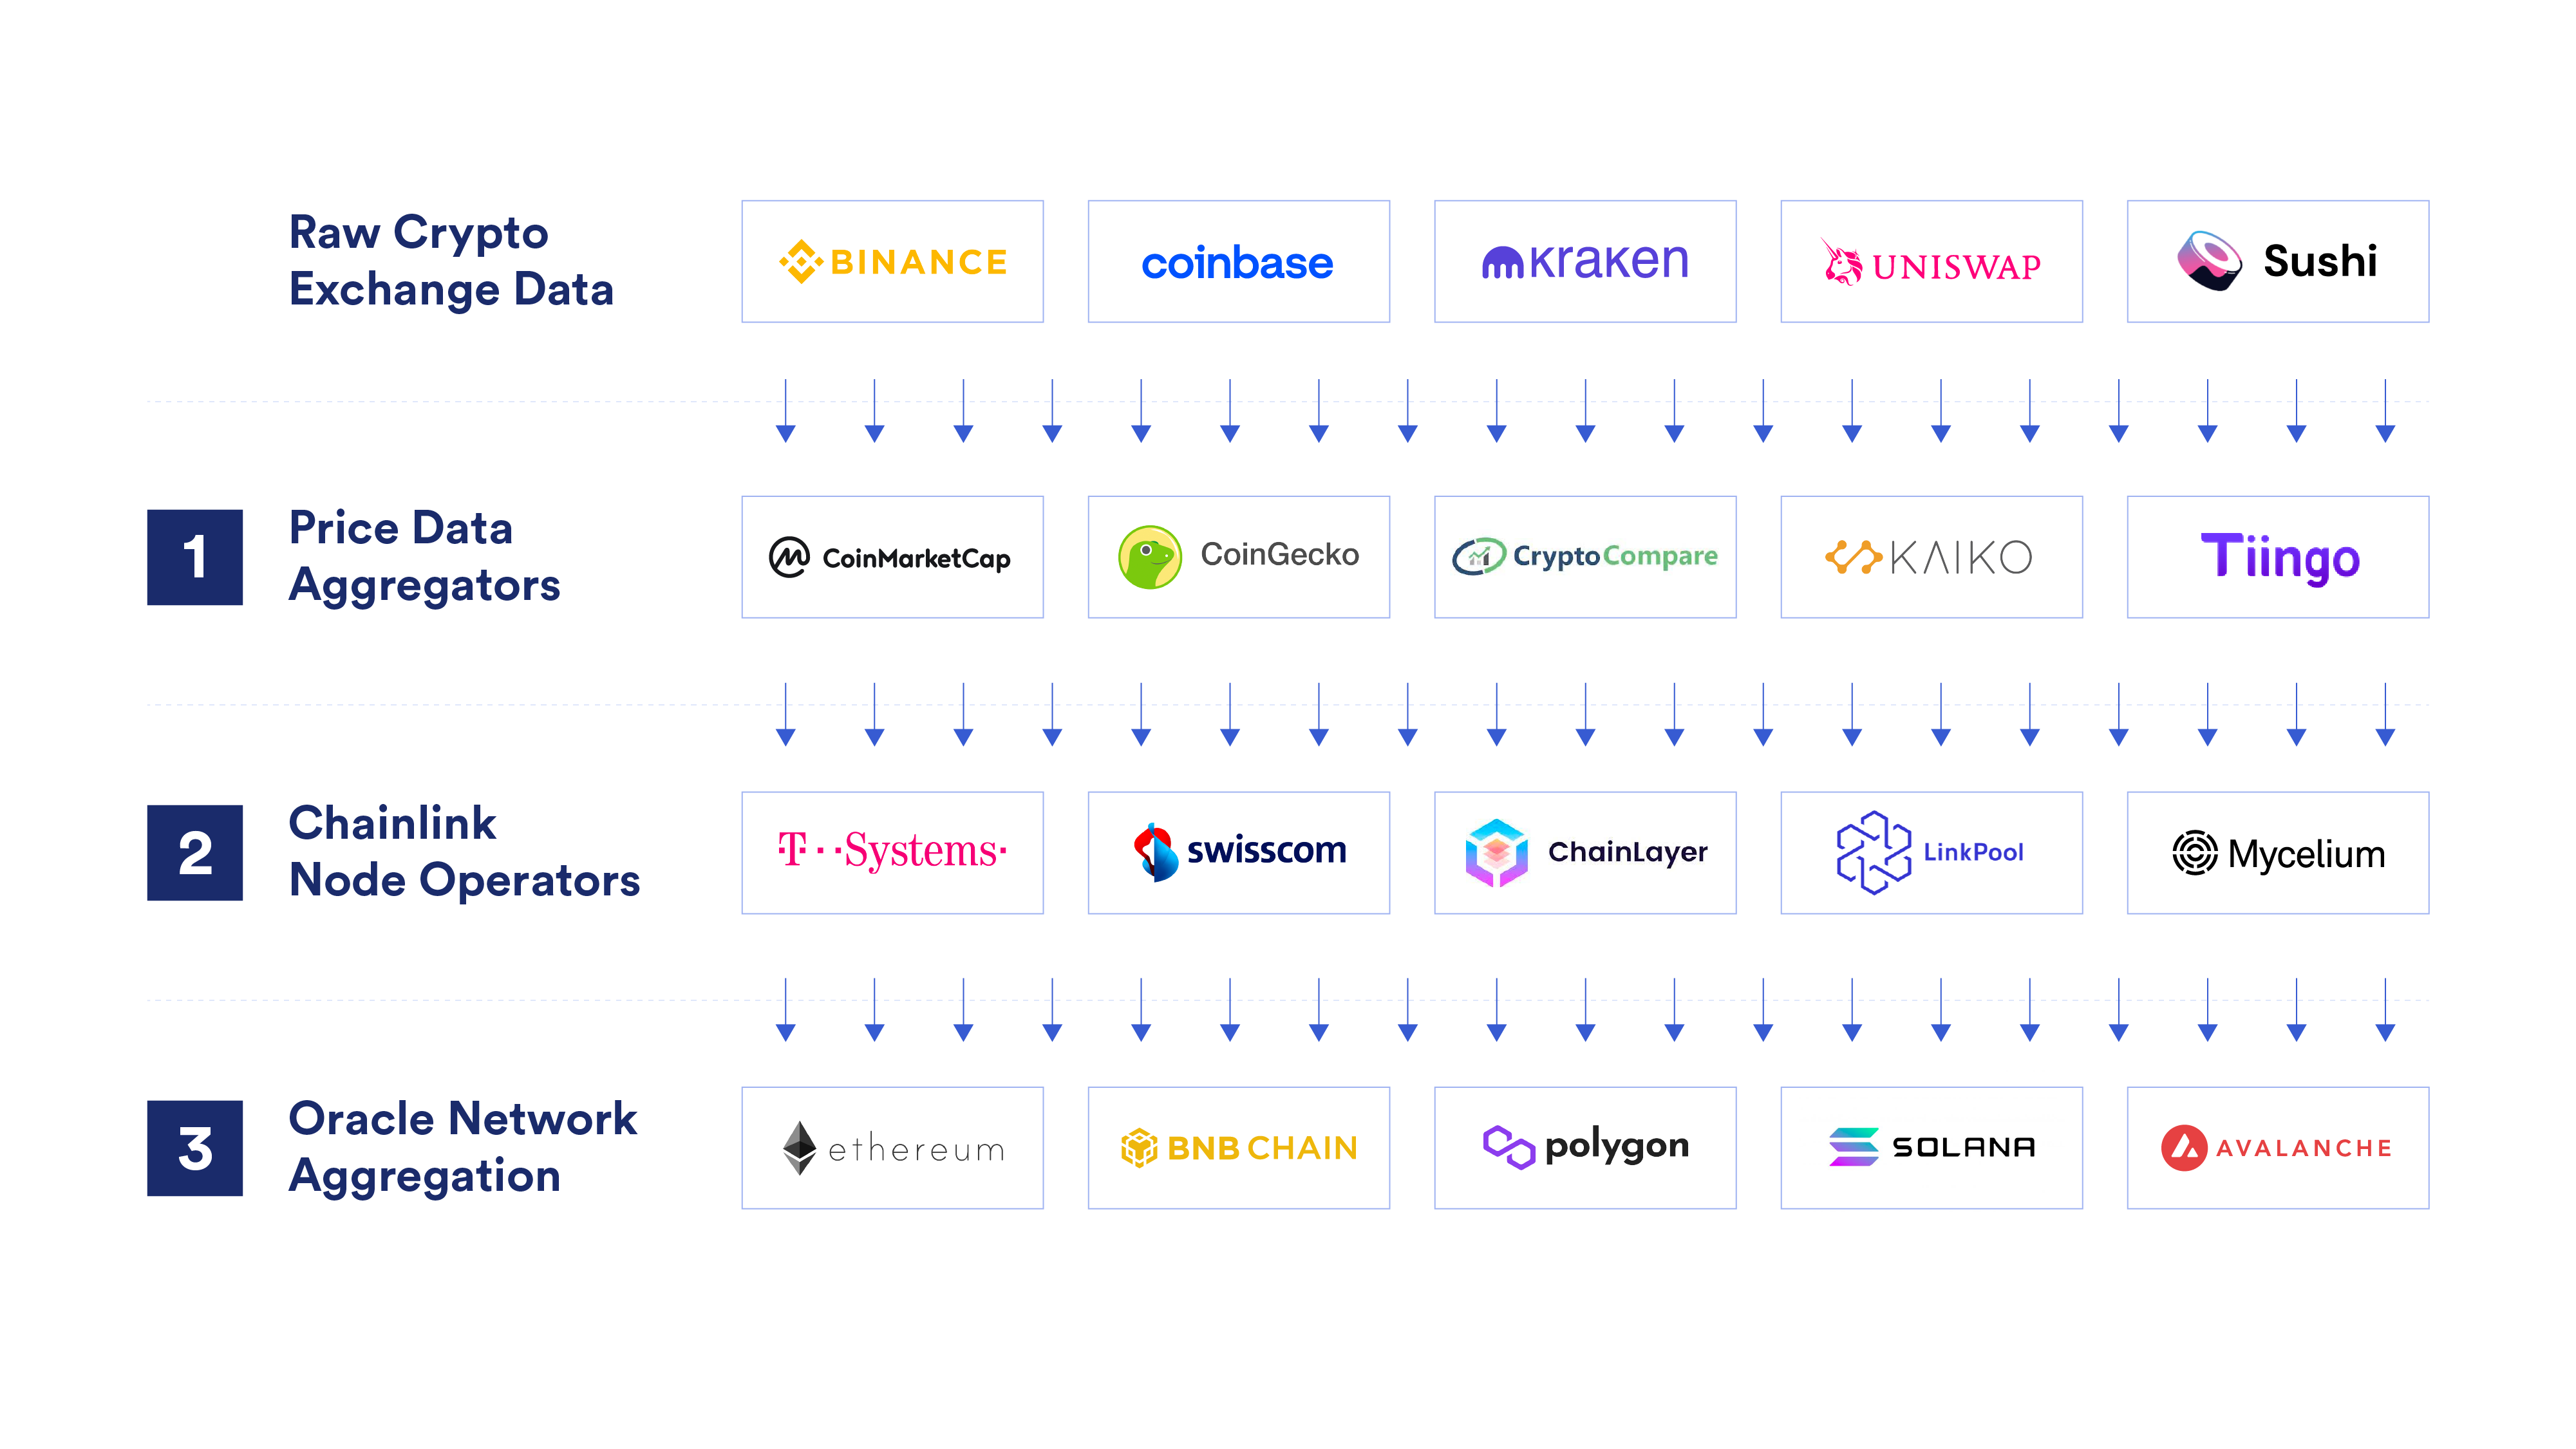 The data aggregation pipeline of Chainlink Price Feeds